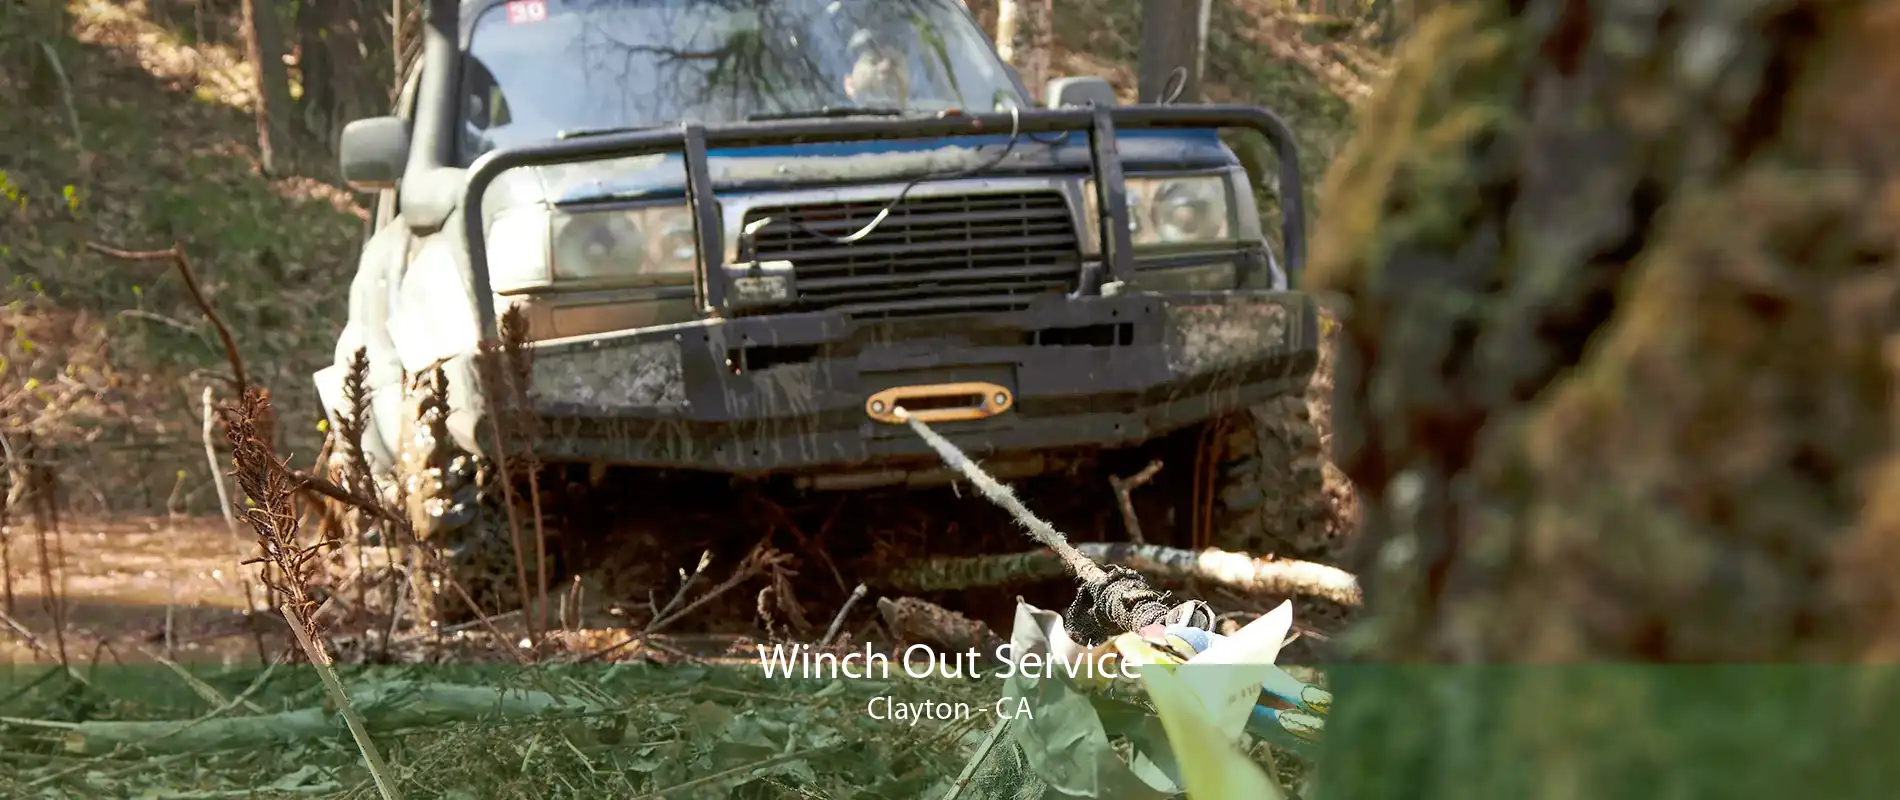 Winch Out Service Clayton - CA